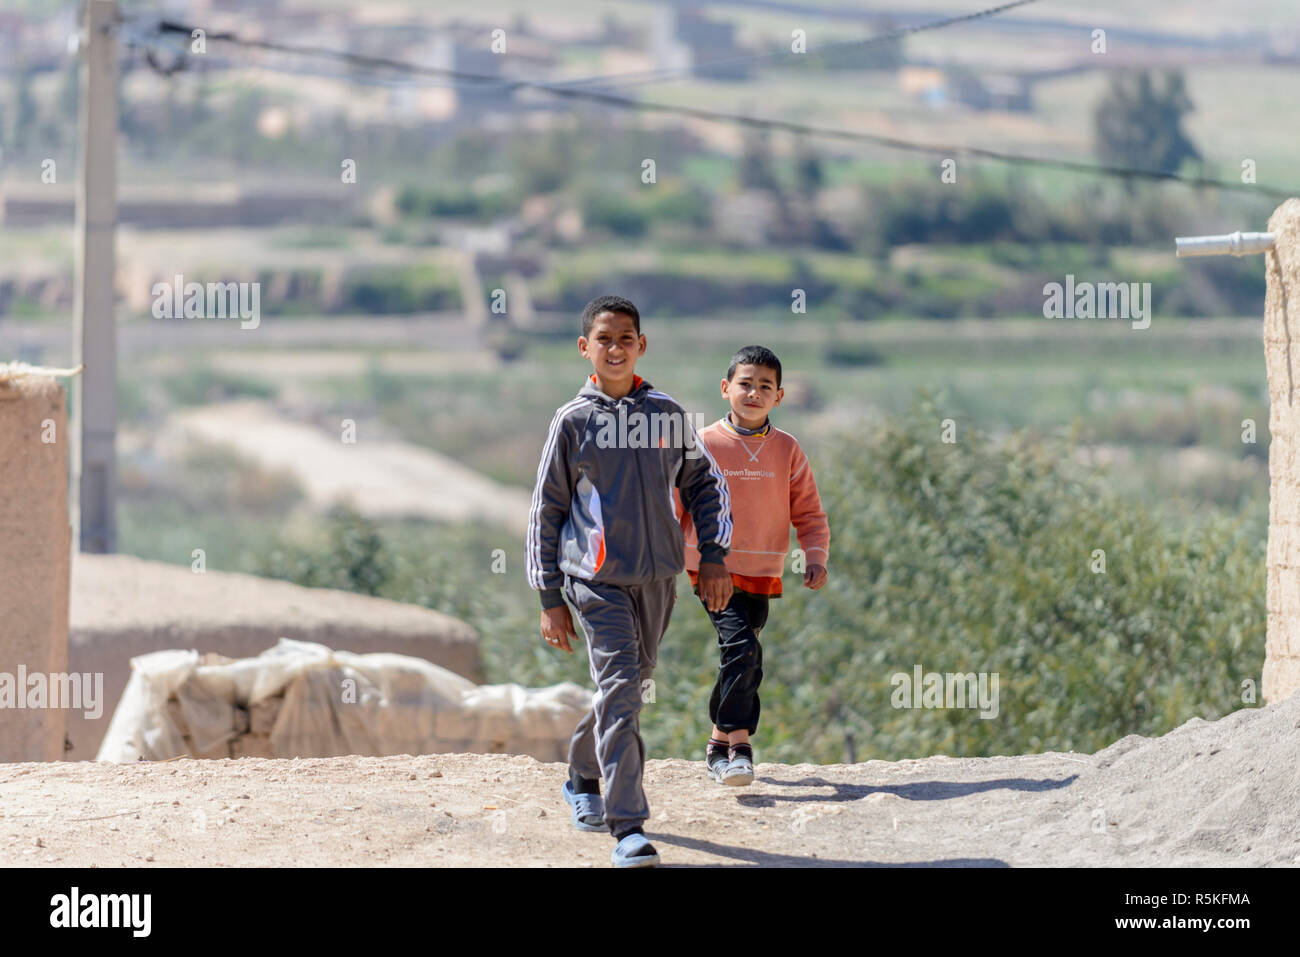 01-03-15, Marrakech, Morocco. Two young Berber boys approach tourists in the sub-Atlas Berber region. Photo: ©Simon Grosset Stock Photo